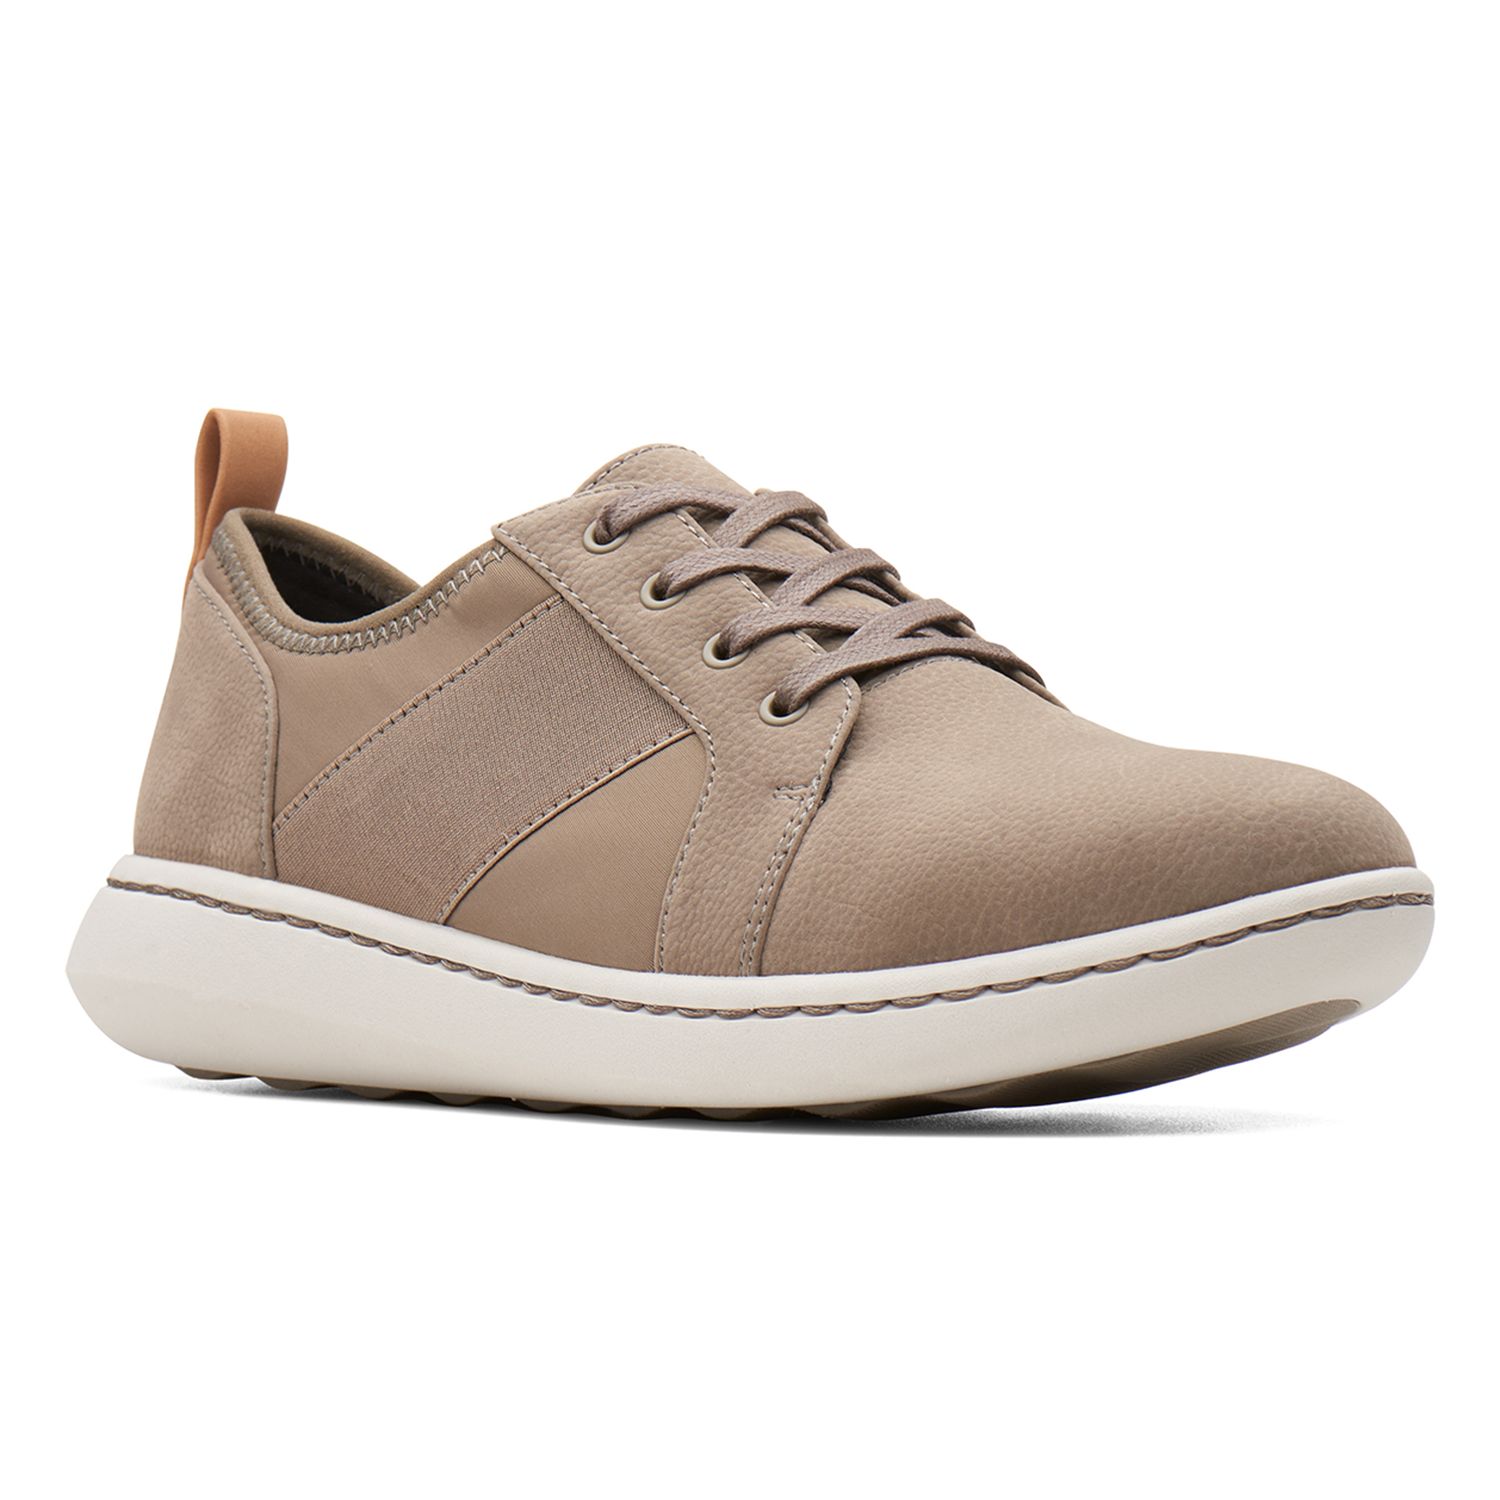 clarks cloudsteppers tennis shoes